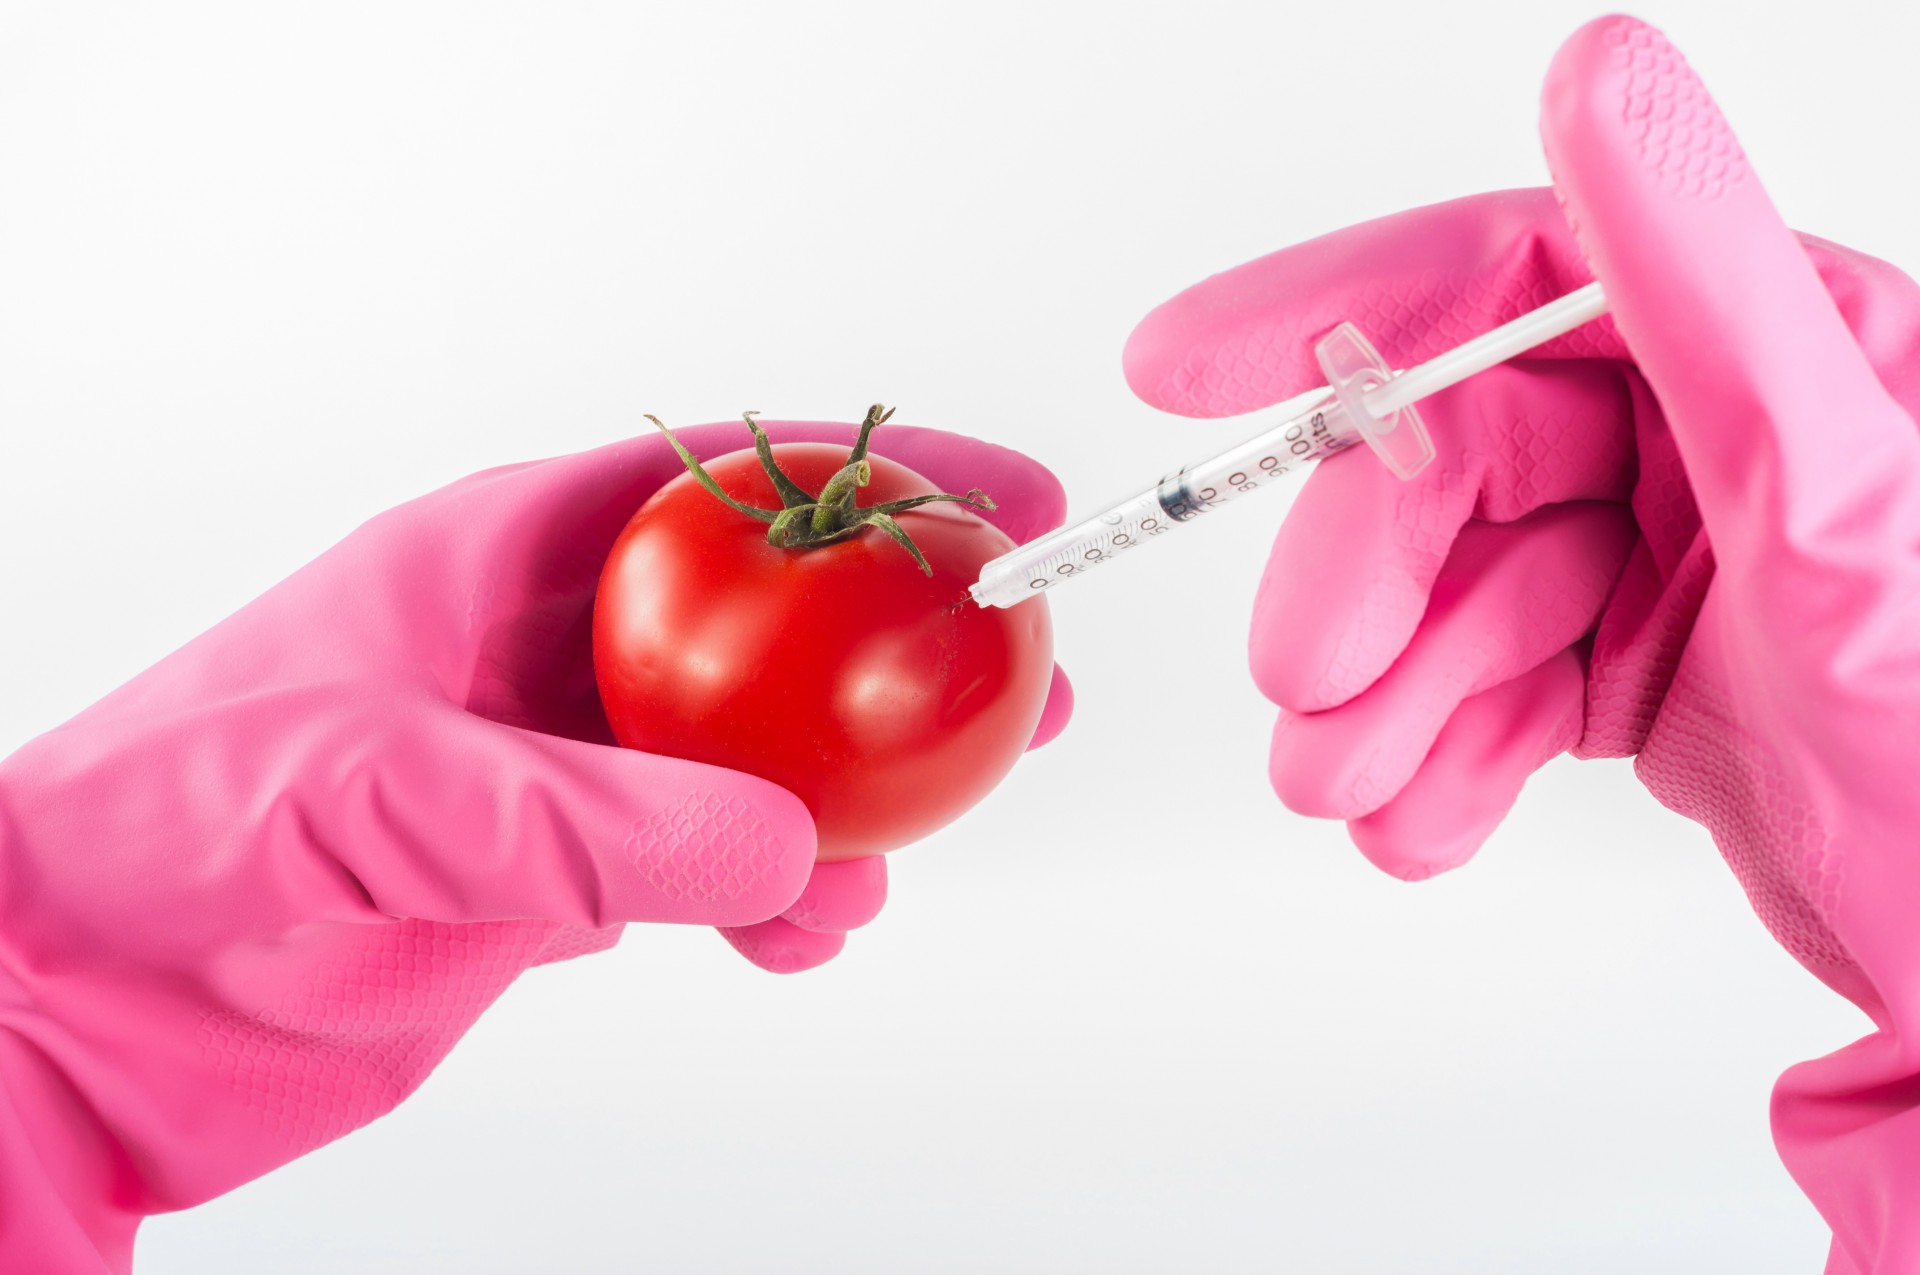 A tomato being injected via syringe 